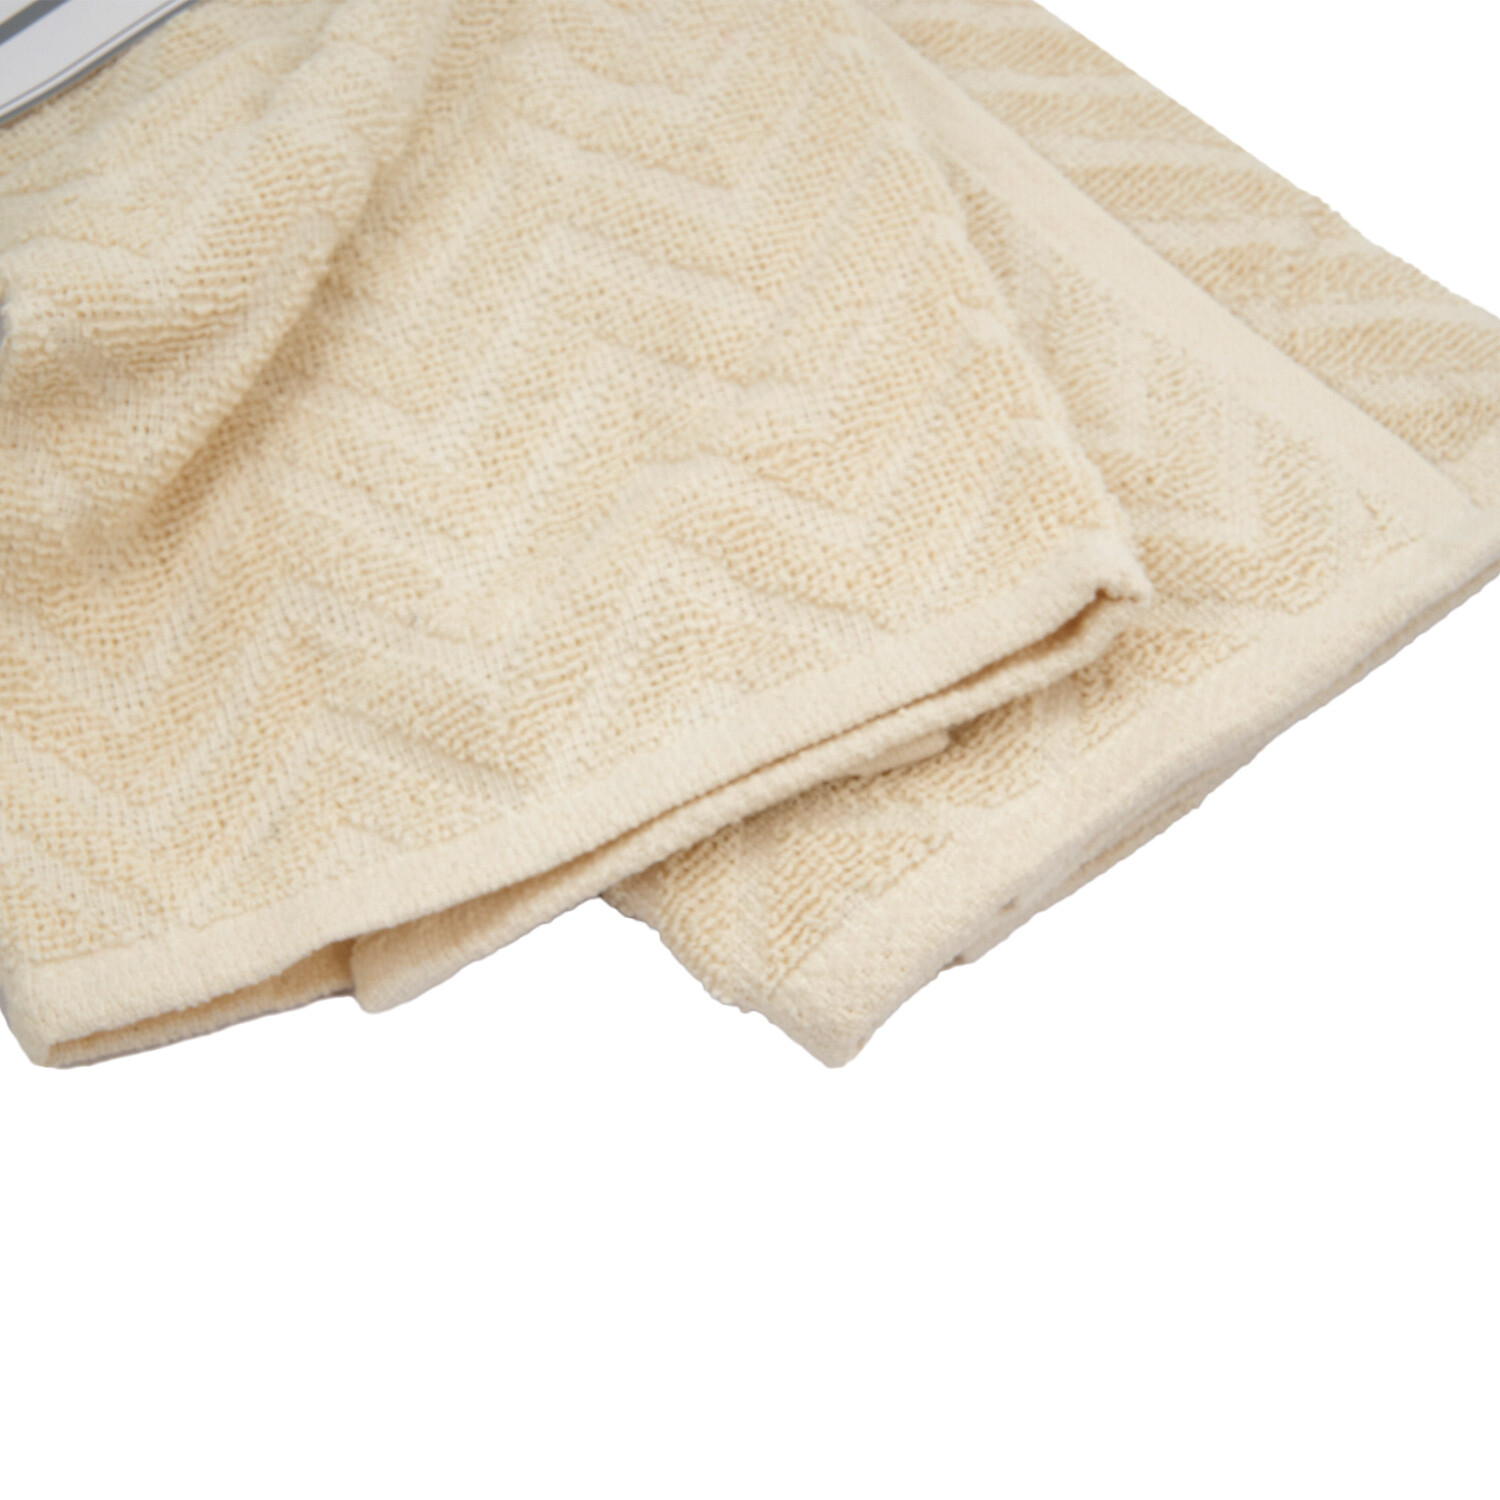 Pack of 2 Jacquard Terry Kitchen Towels - Cream Image 2